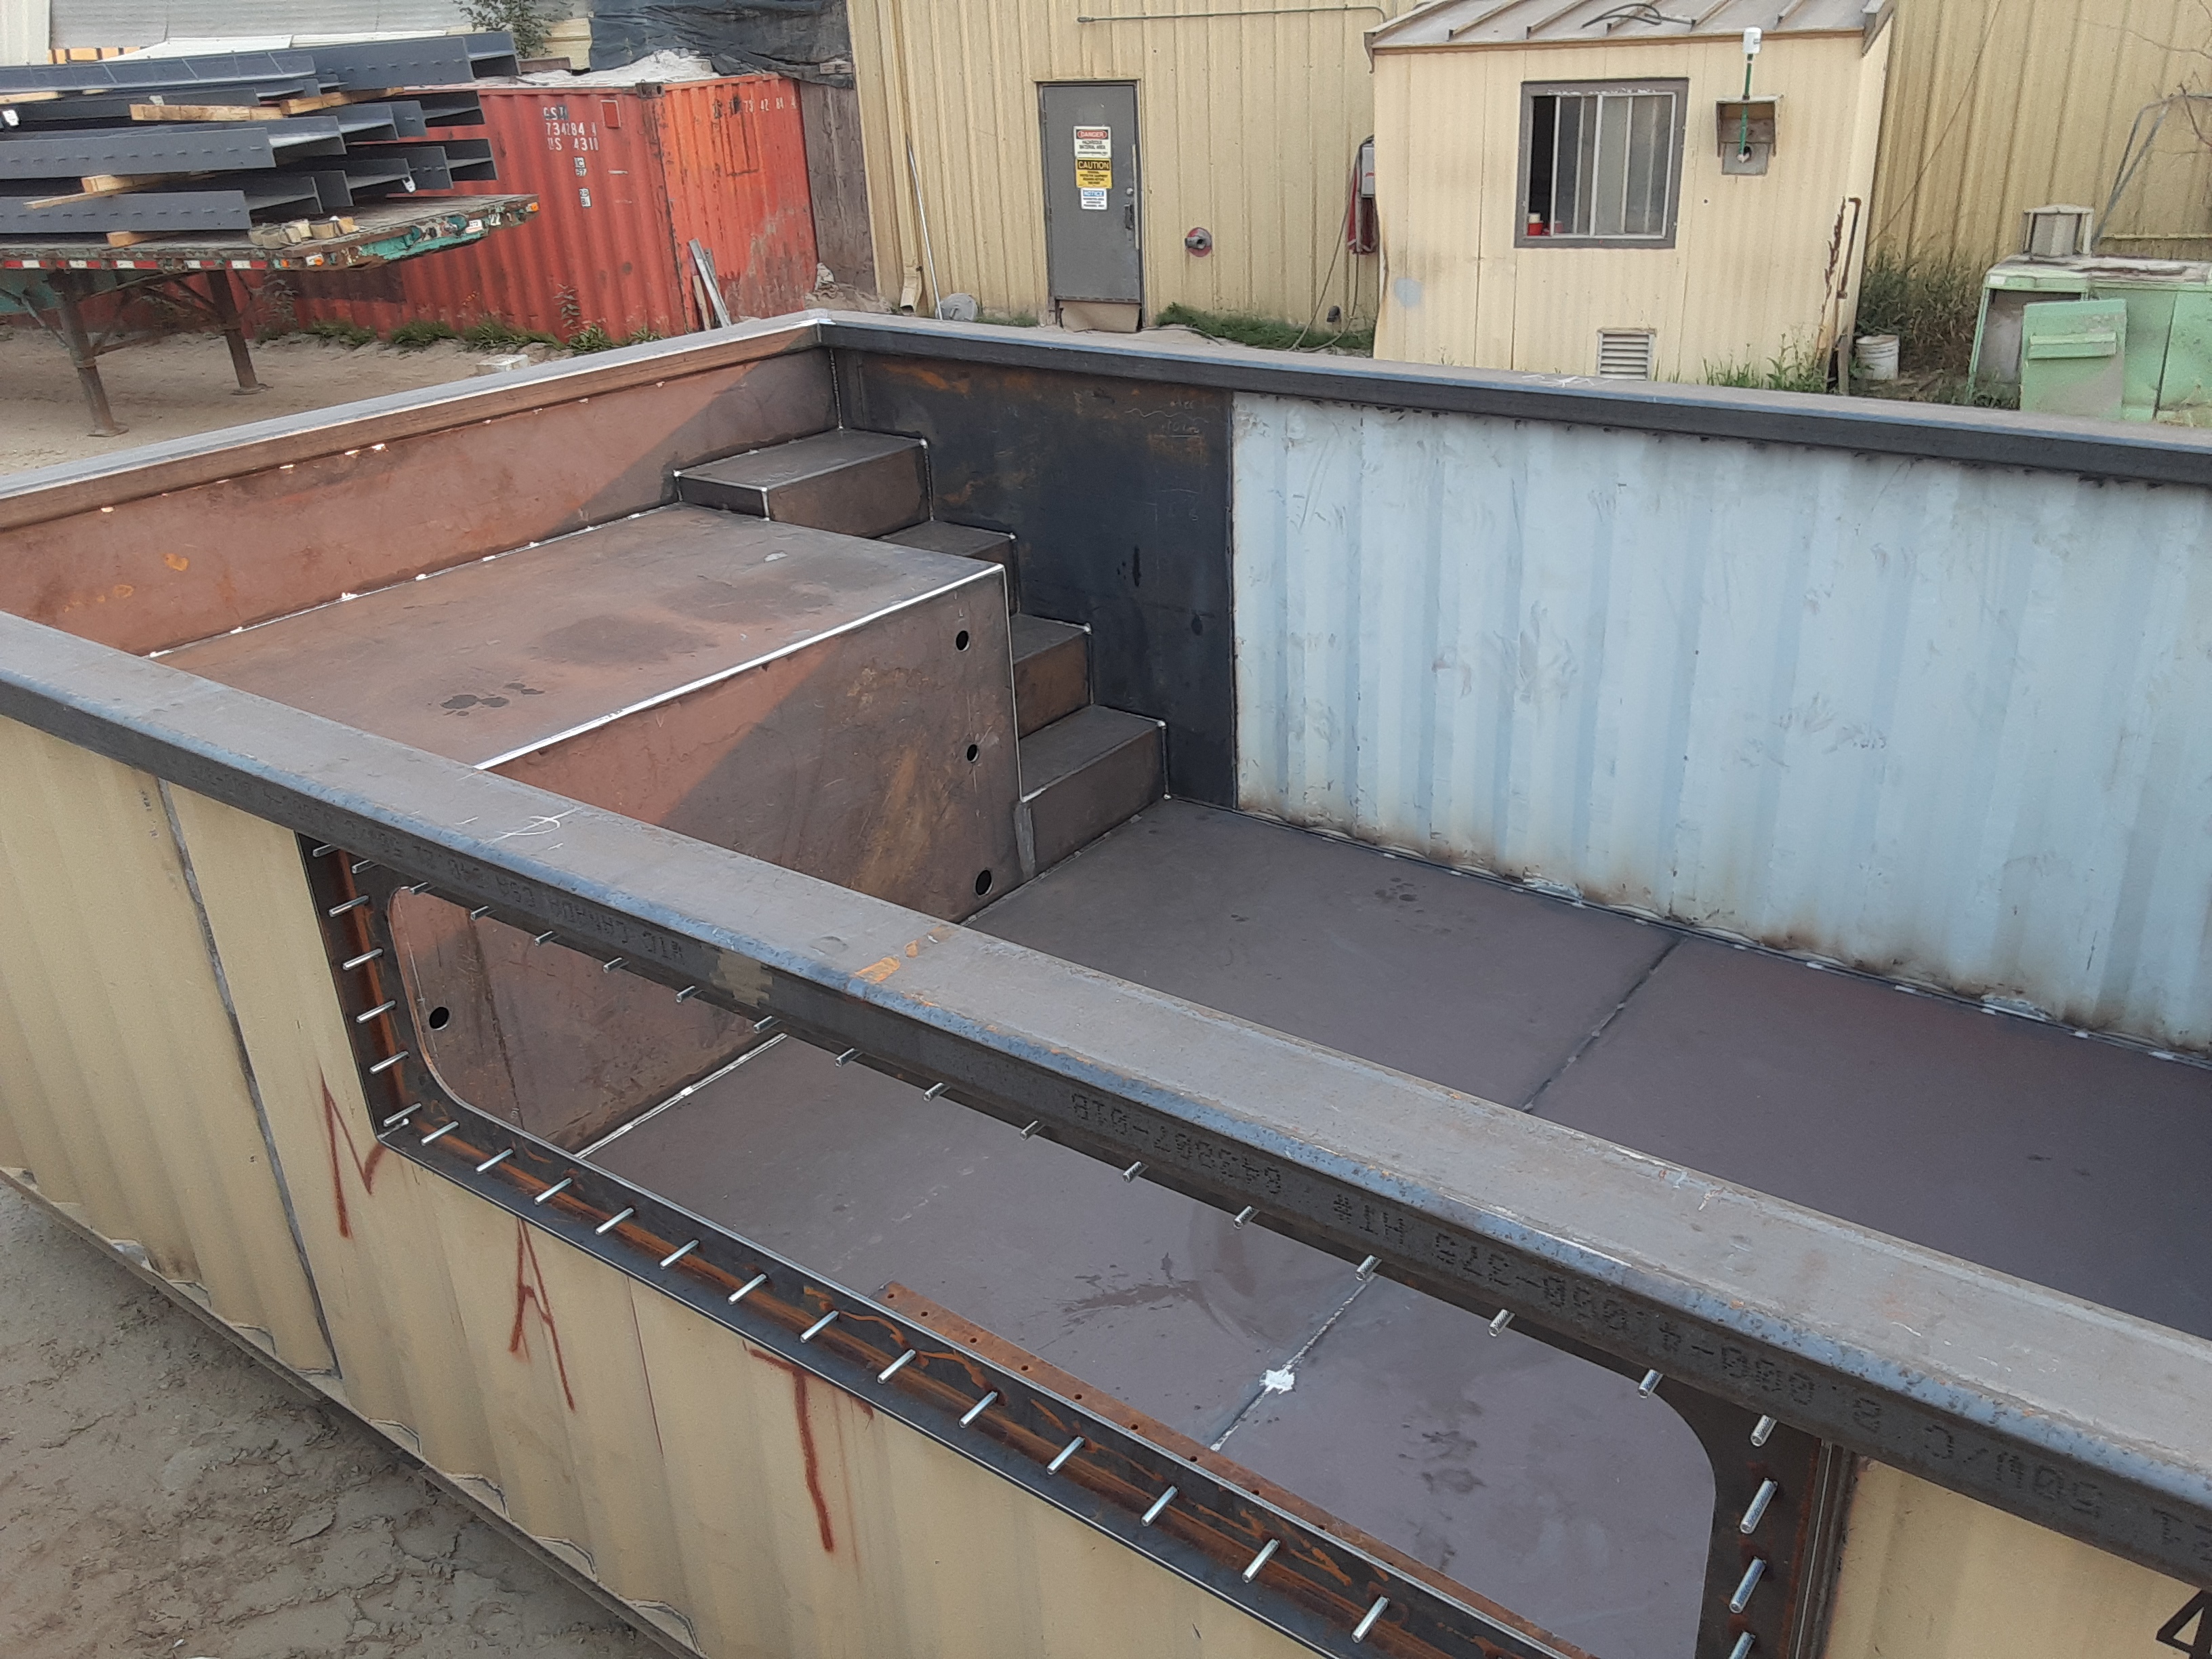 An above ground pool ready for blasting